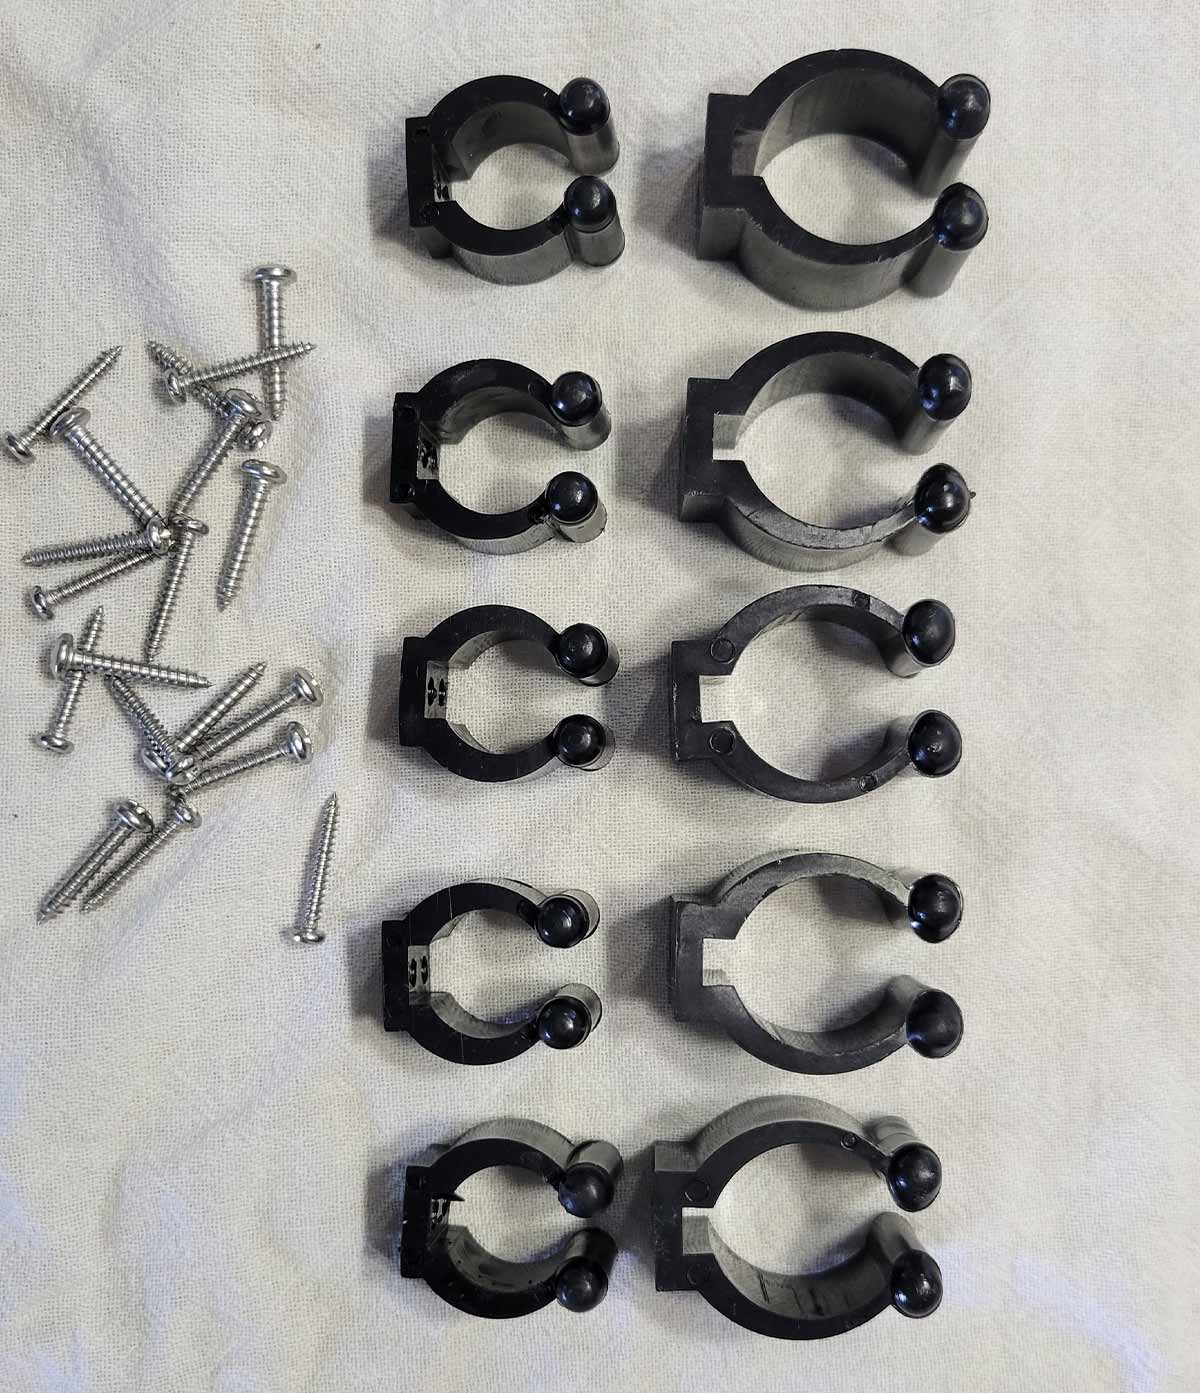 five sets of brackets (clips) and stainless-steel screws laid out